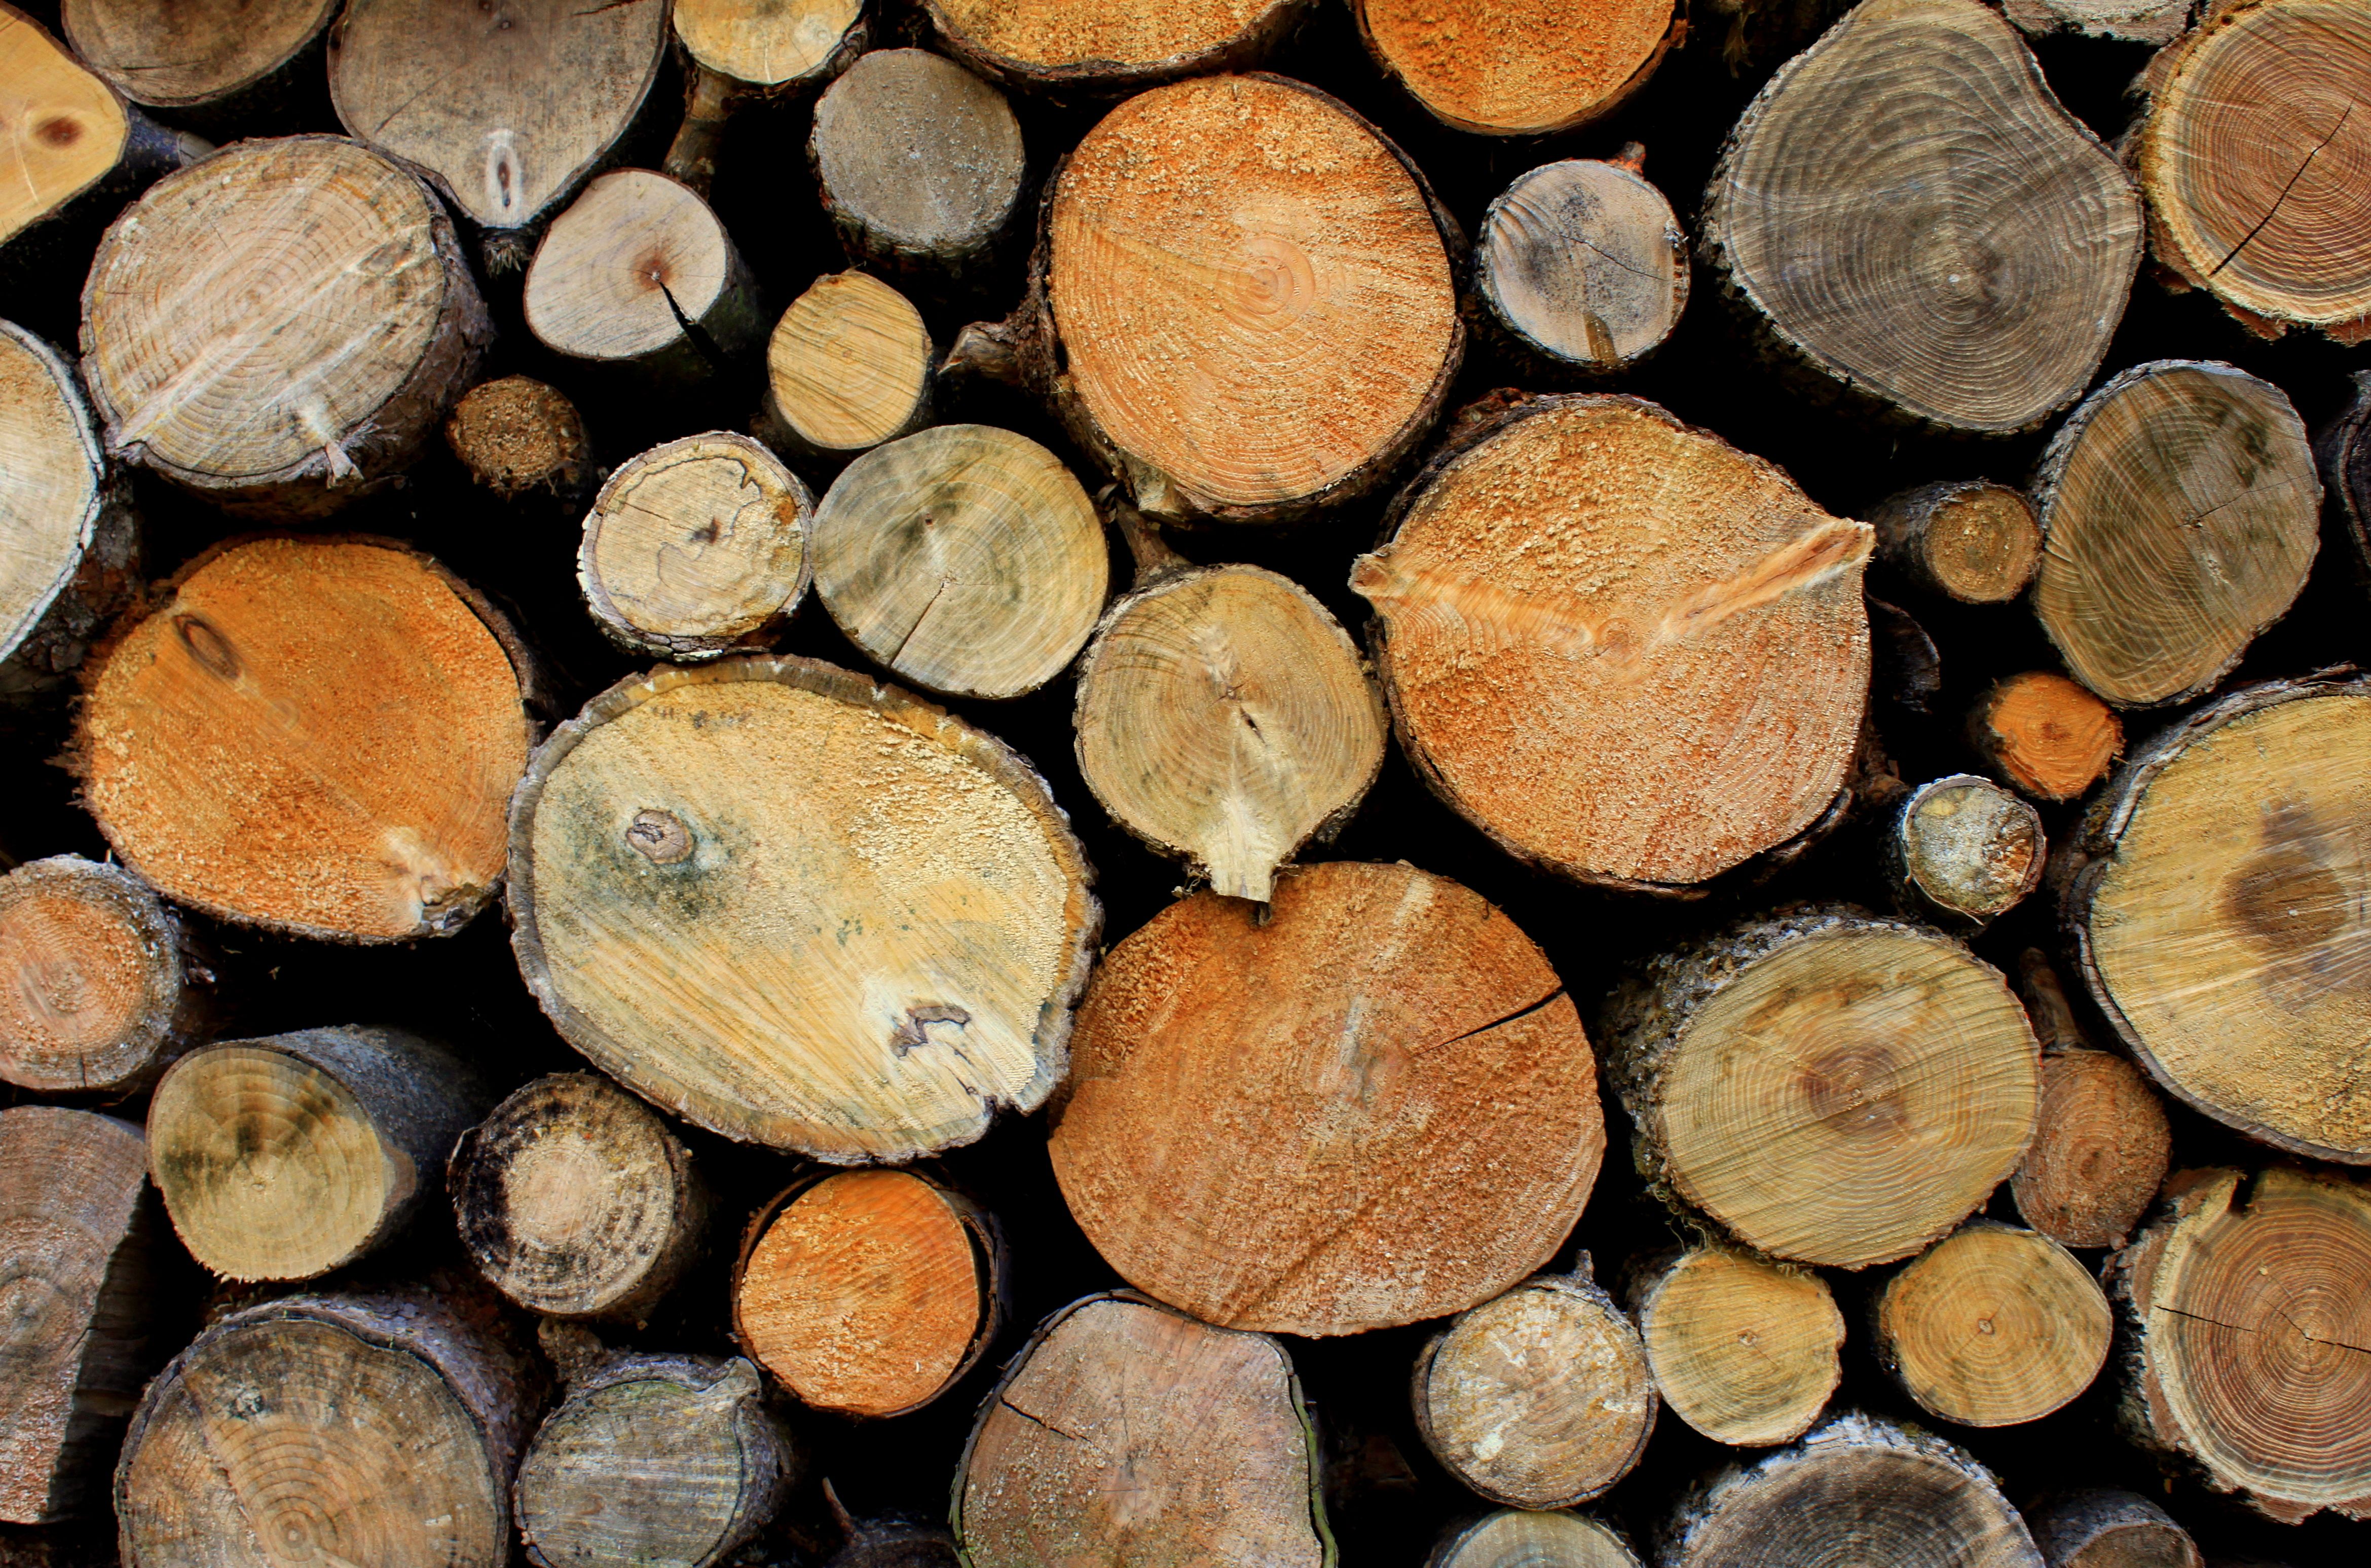 Firewood HD Wallpaper, For Free Download